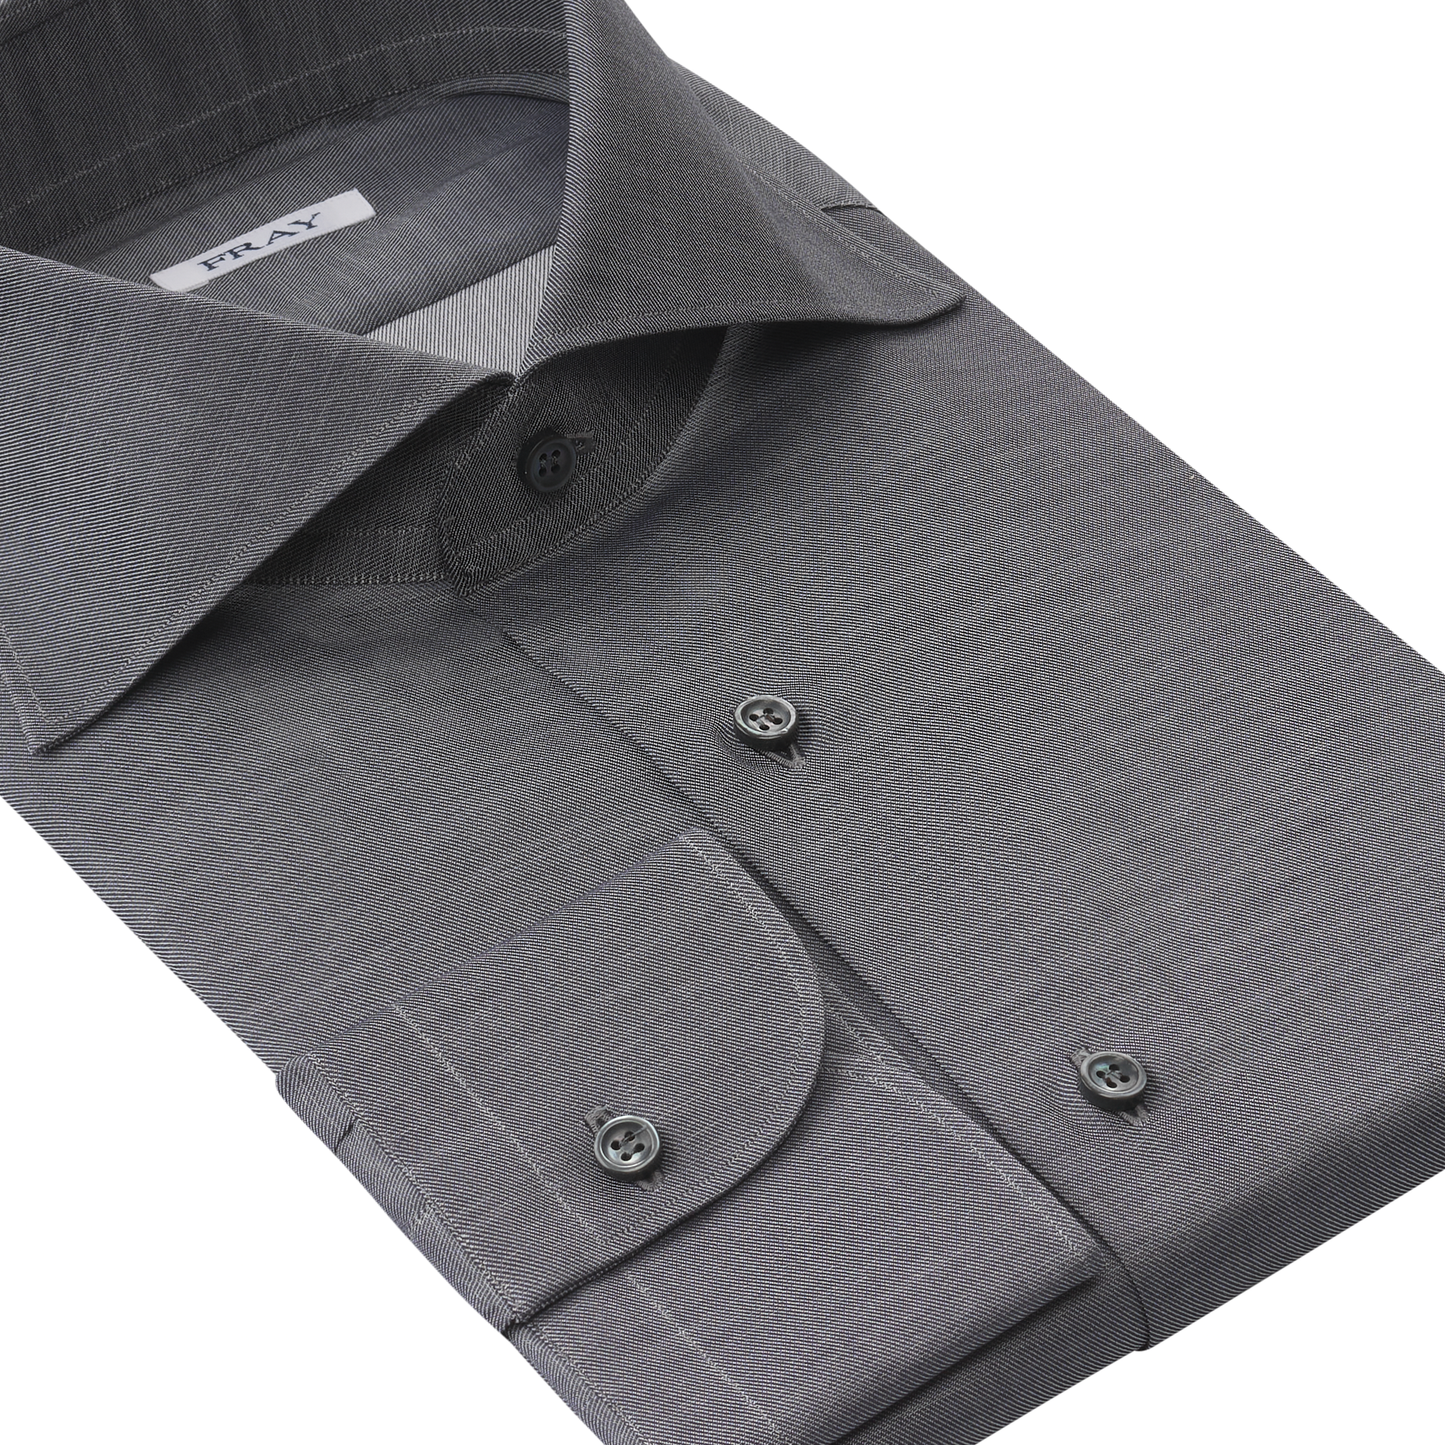 Fray Classic Cotton Shirt in Grey - SARTALE